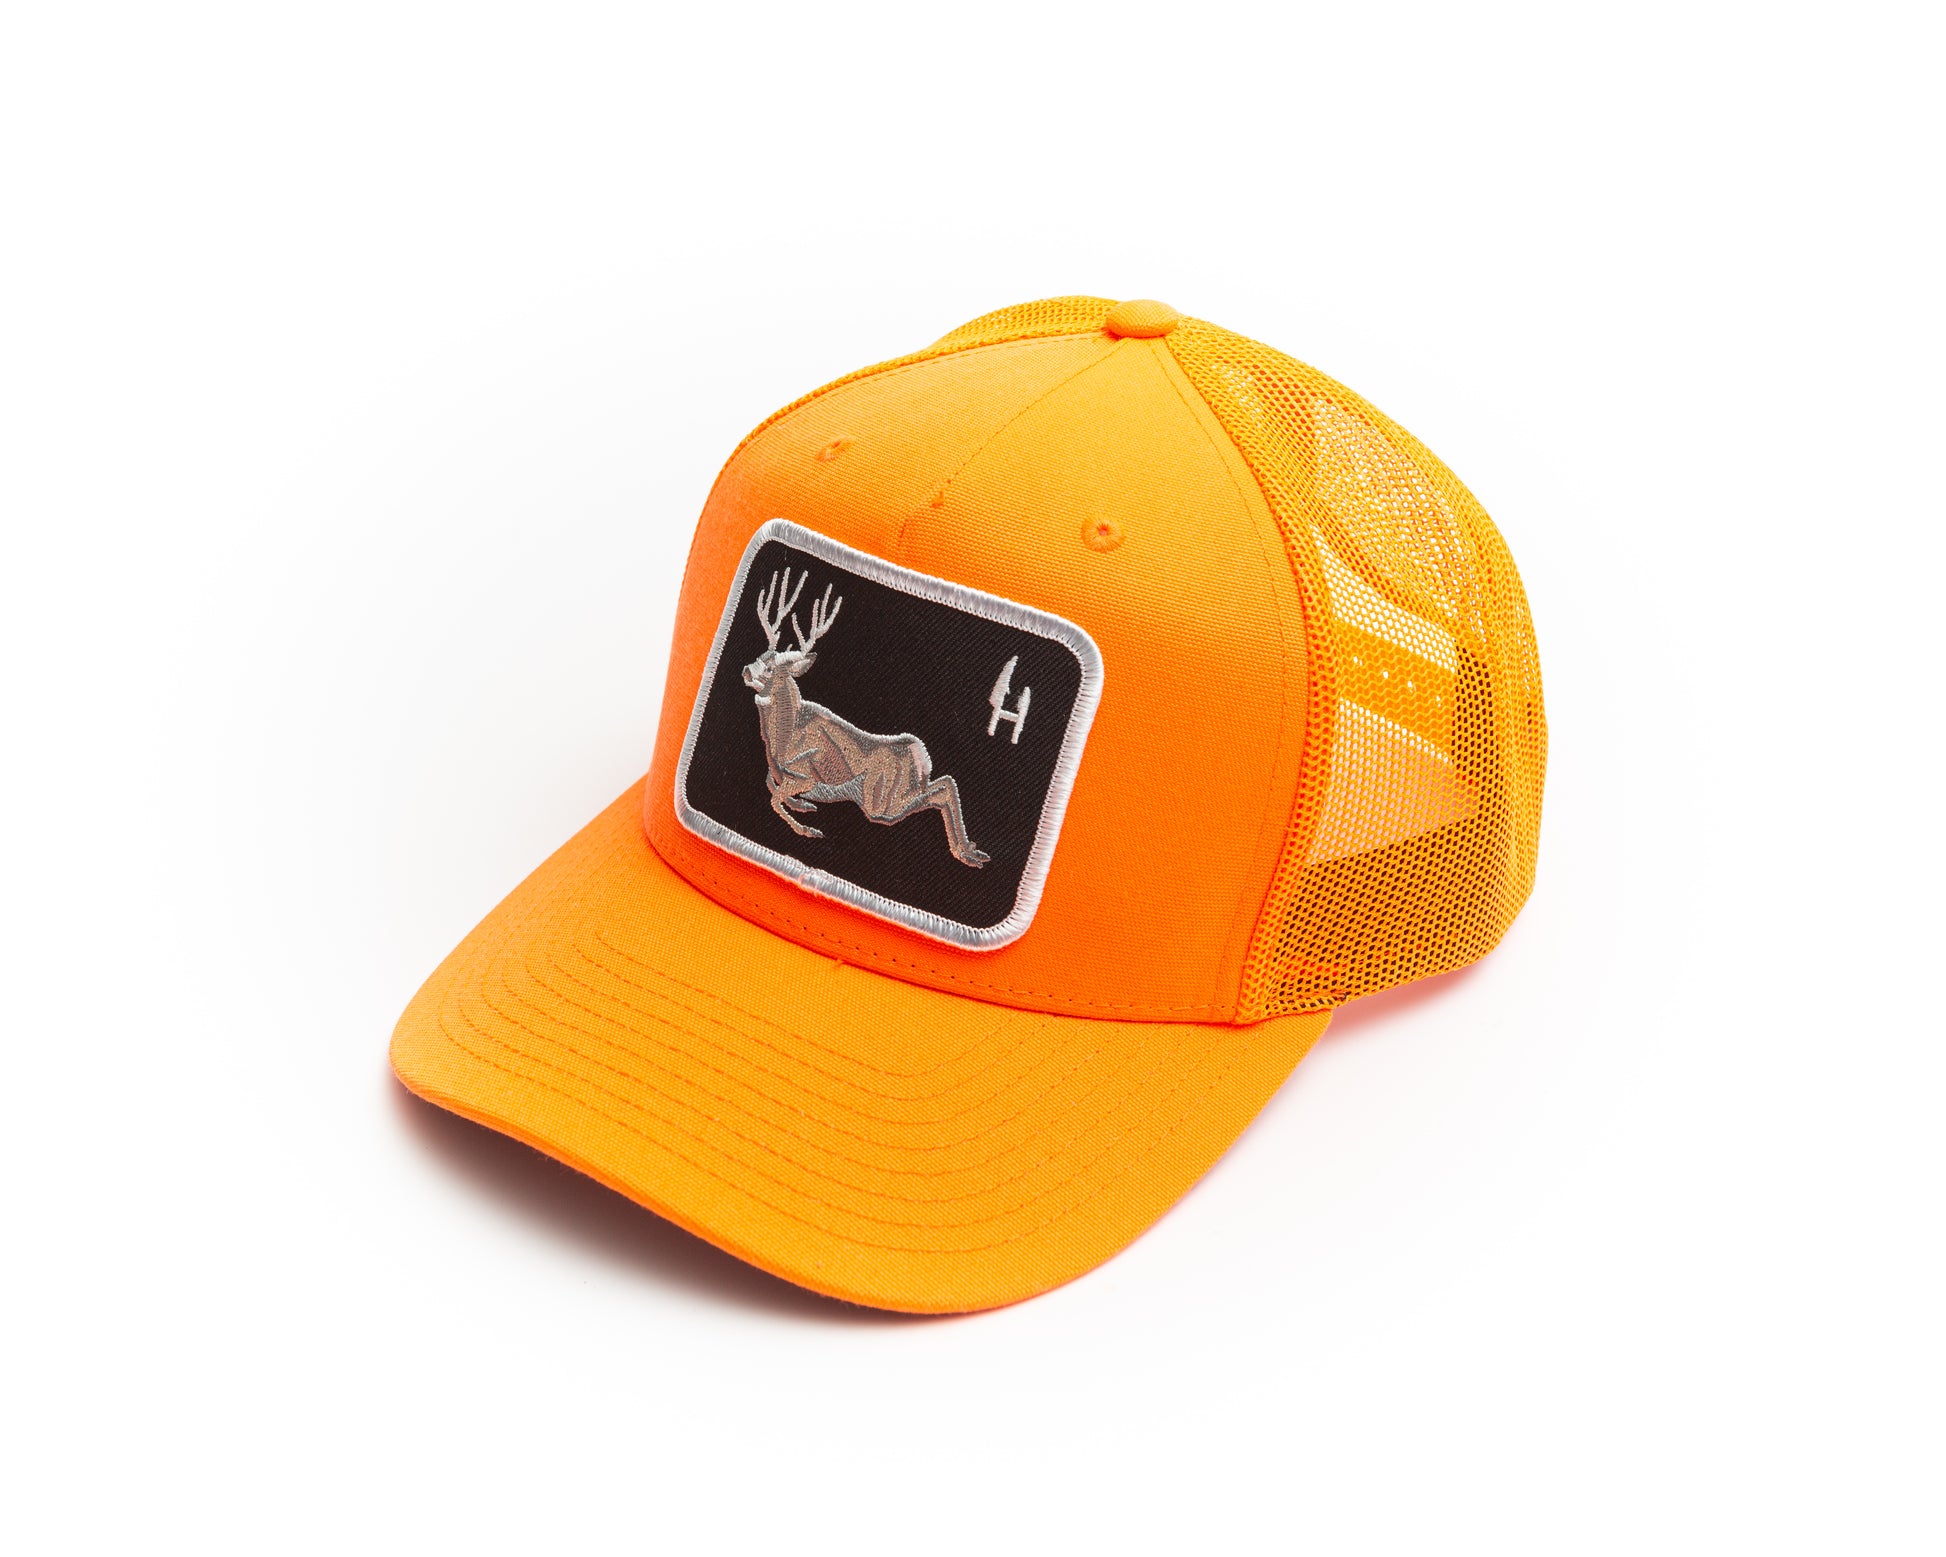 Hunt To Eat blaze orange trucker cap decorated with a beautiful embroidered patch of a bounding Mule deer buck.  The patch has a black twill background with white merrowed border.  The hat is a richardson blaze orange trucker mesh snap back.  Perfect for use during gun season, safety orange.